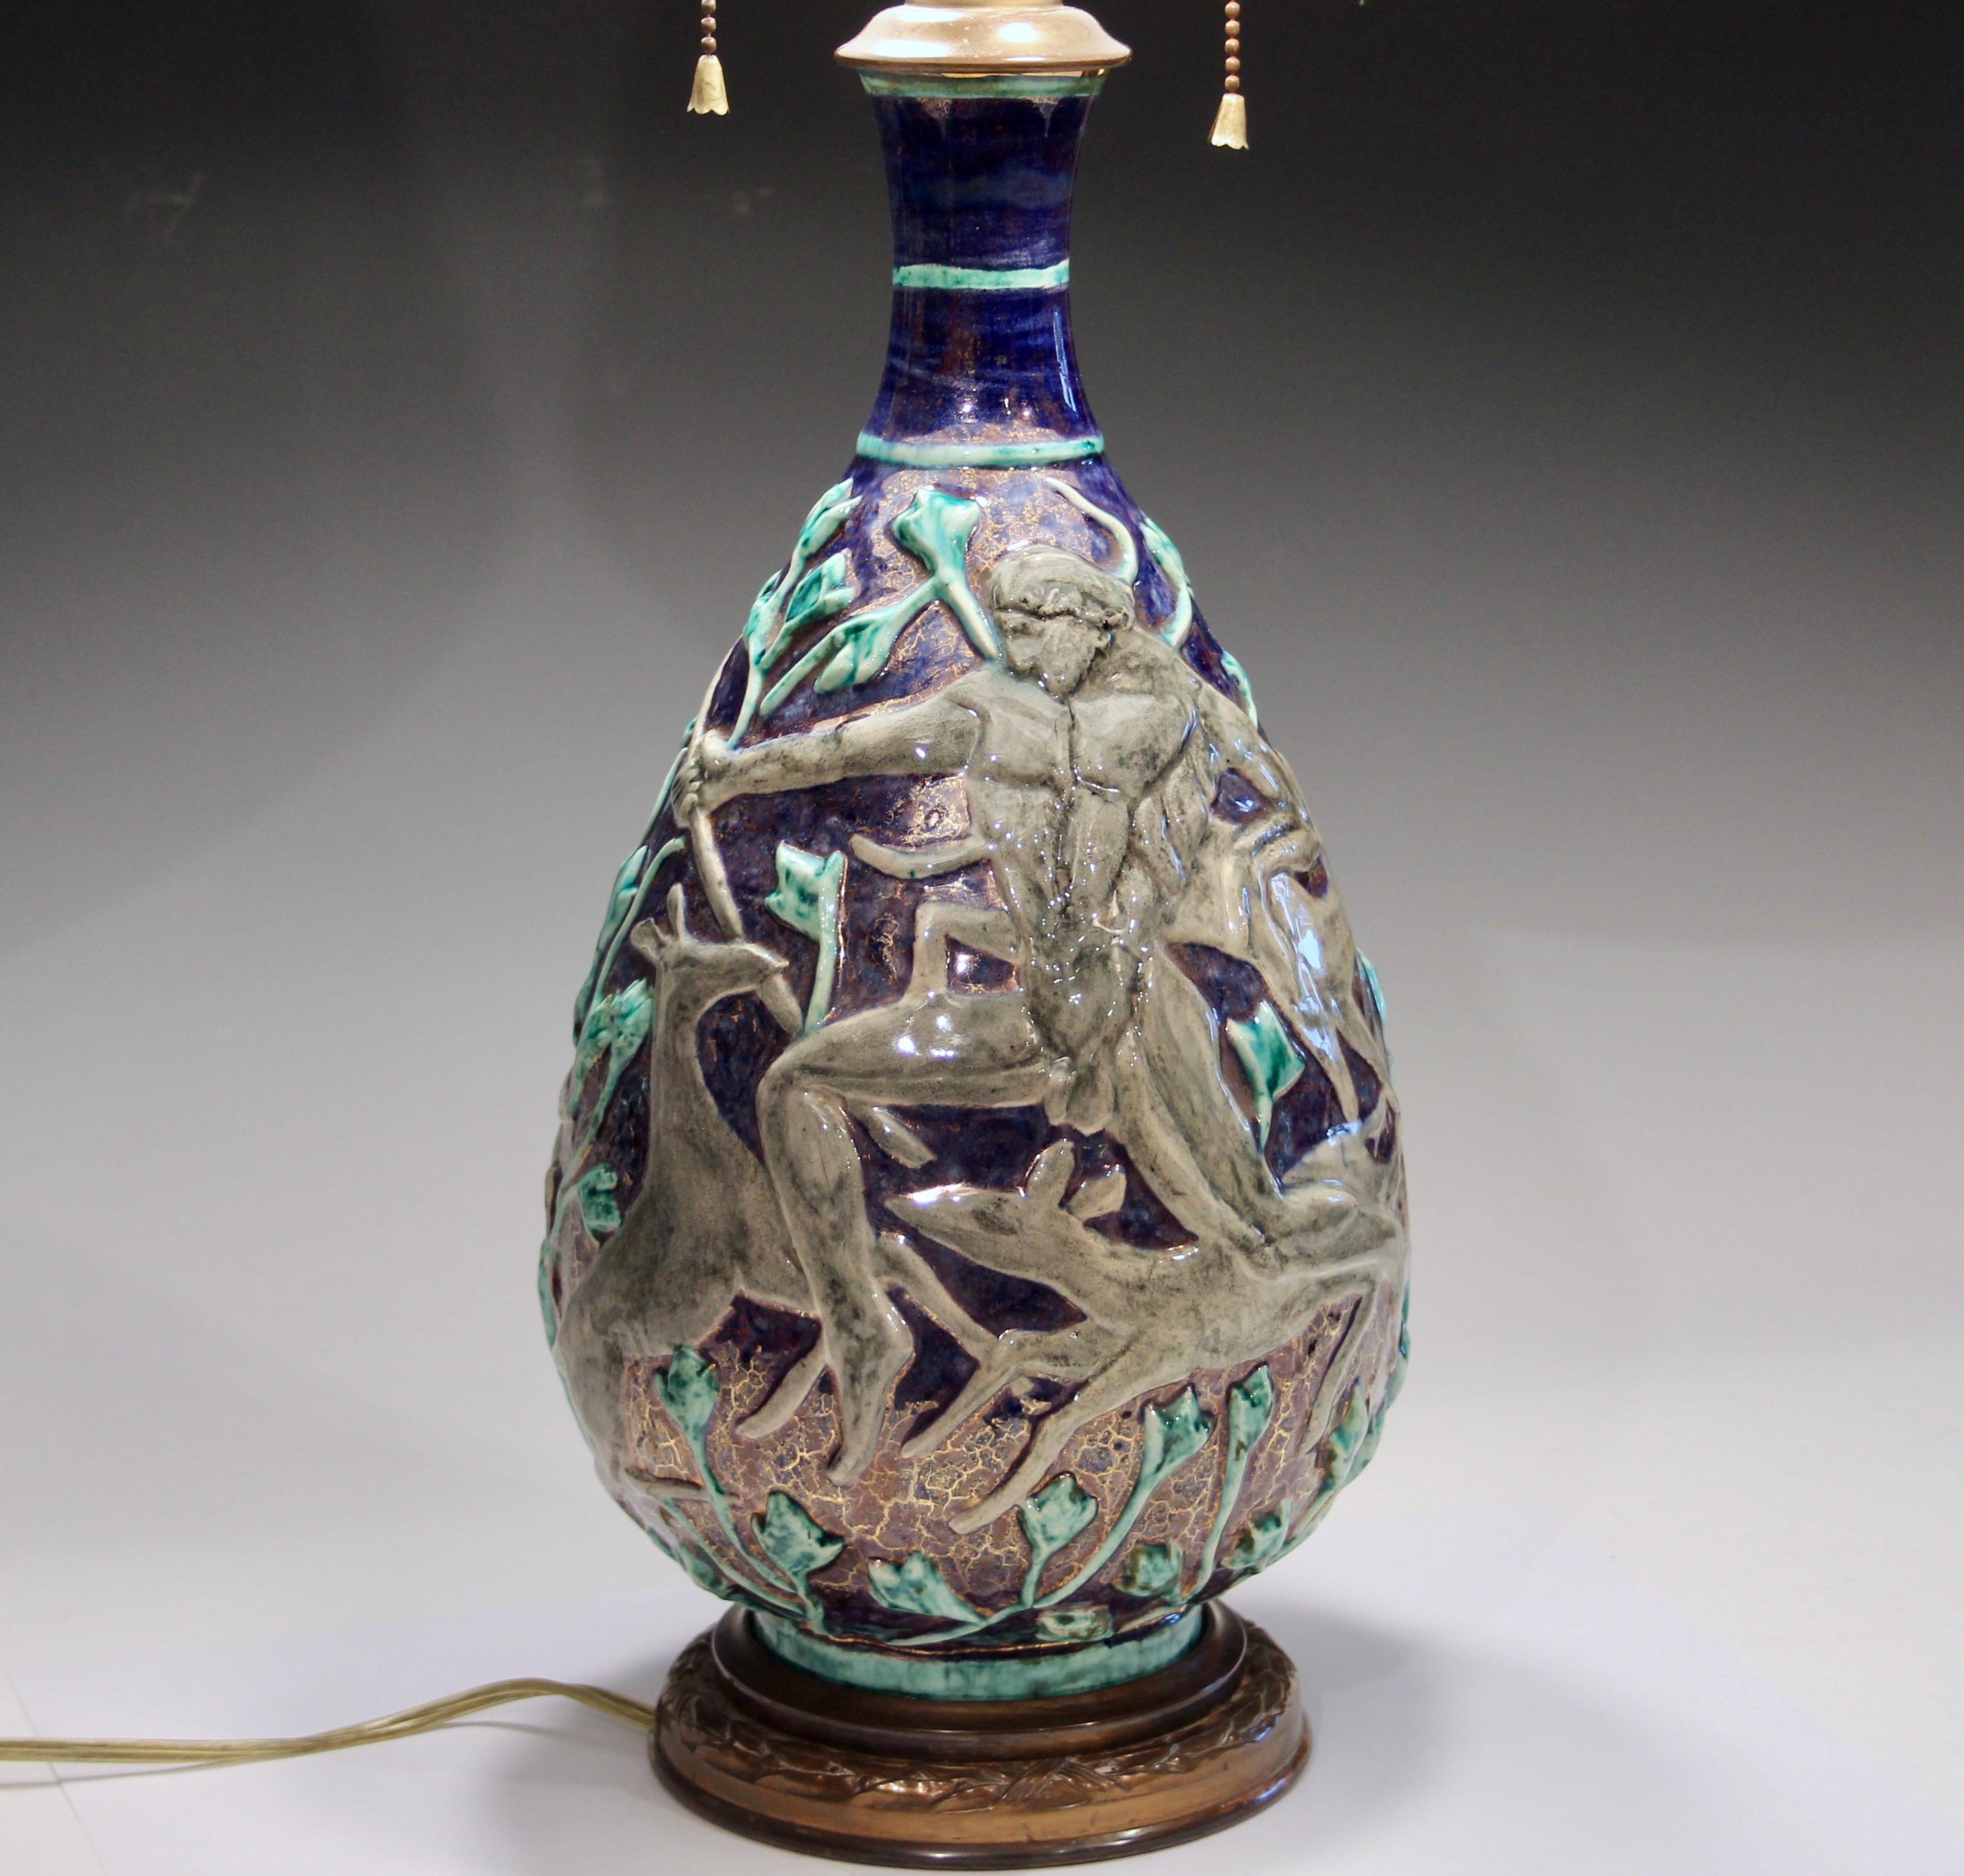 Vintage Jean Mayodon Art Deco pottery lamp decorated with deer and hunters amidst a gilt blue and green forest. Circa 1920's. Nice quality brass hardware with mellowed patina. Double S socket cluster with smooth pulls and shade riser. Impressed